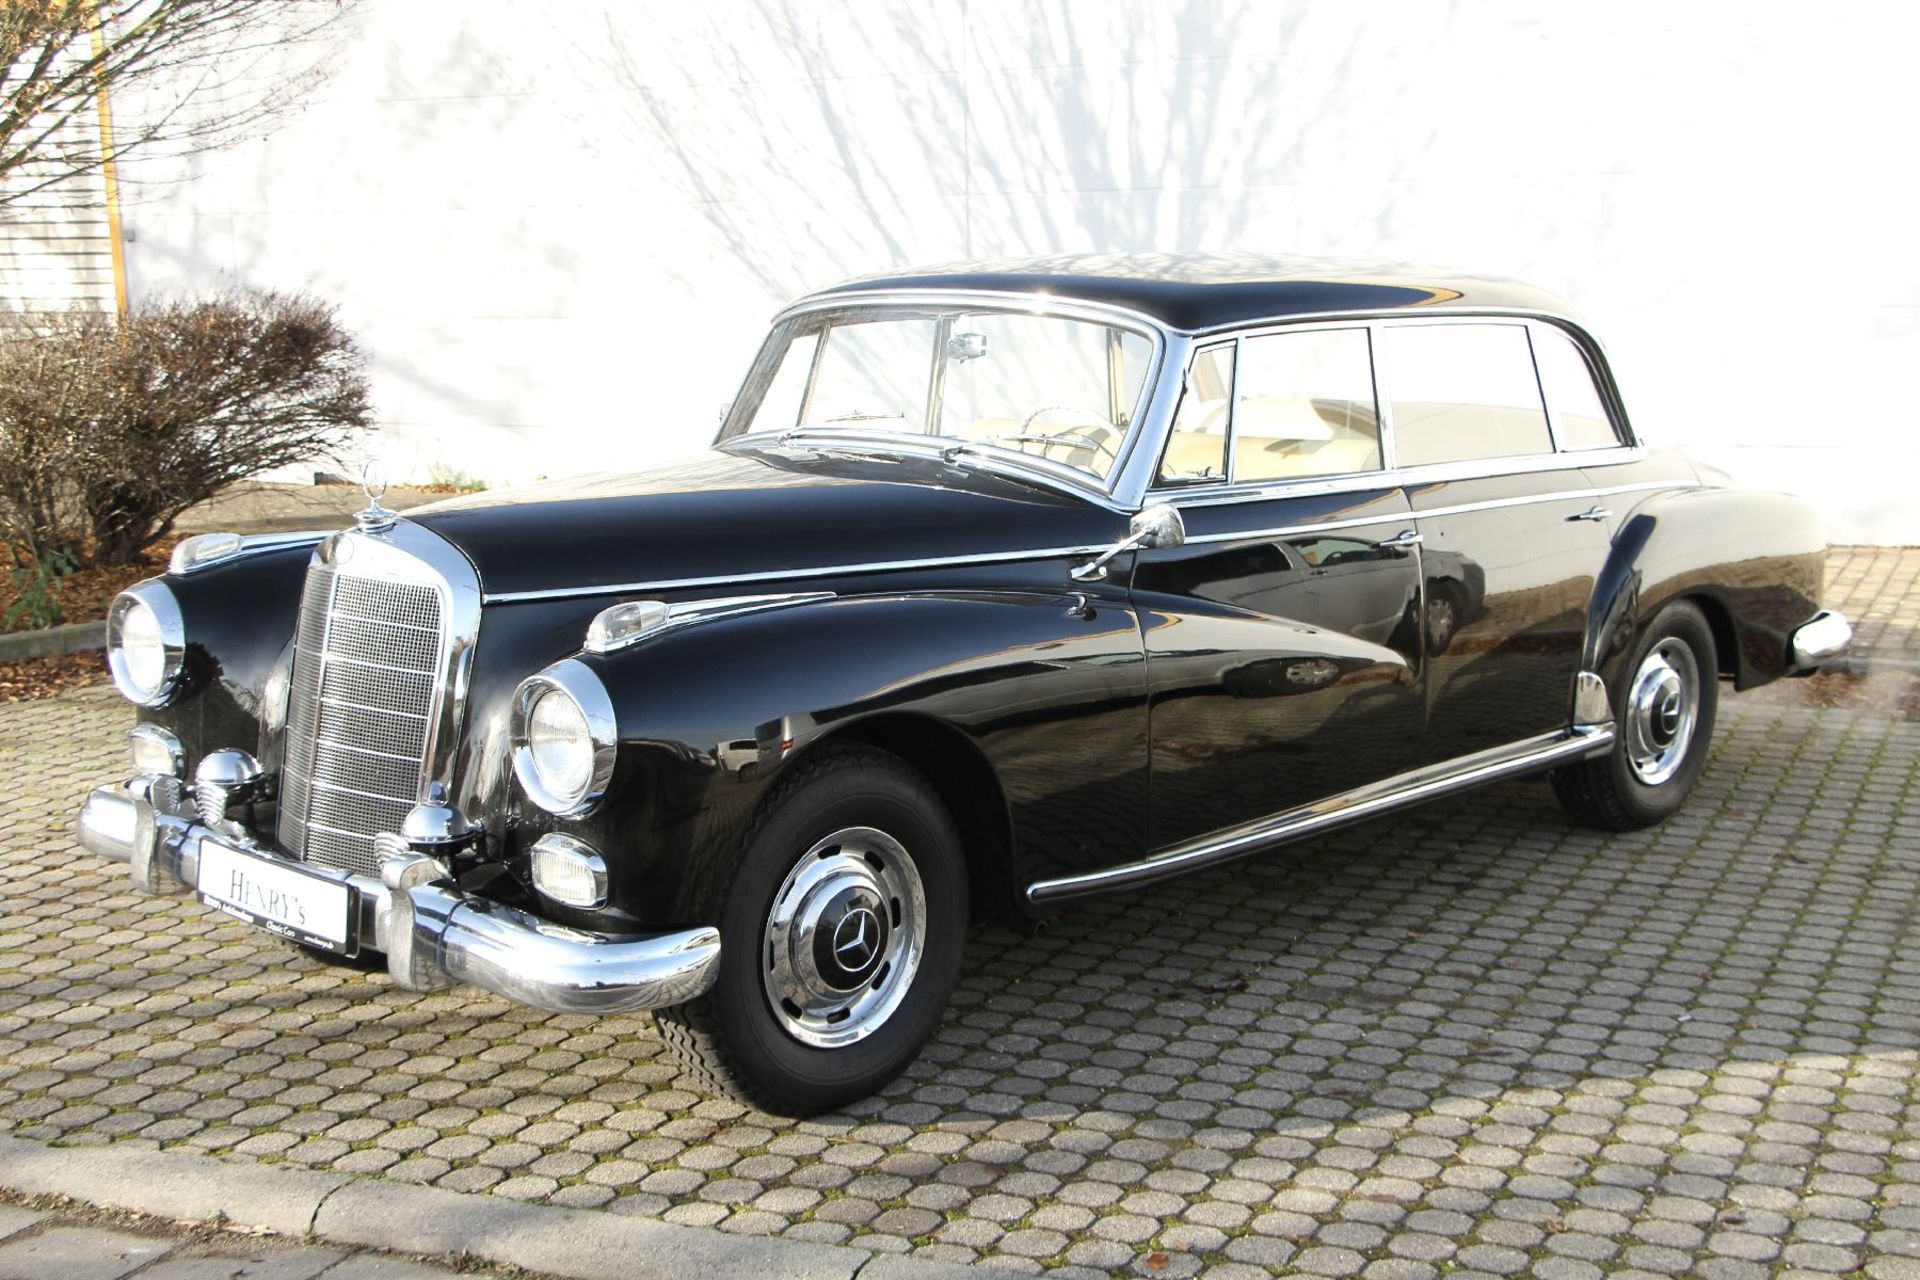 Mercedes-Benz 300d Adenauer, Chassis Number: 8500228, first registered 07/1958, two owners within - Bild 3 aus 16